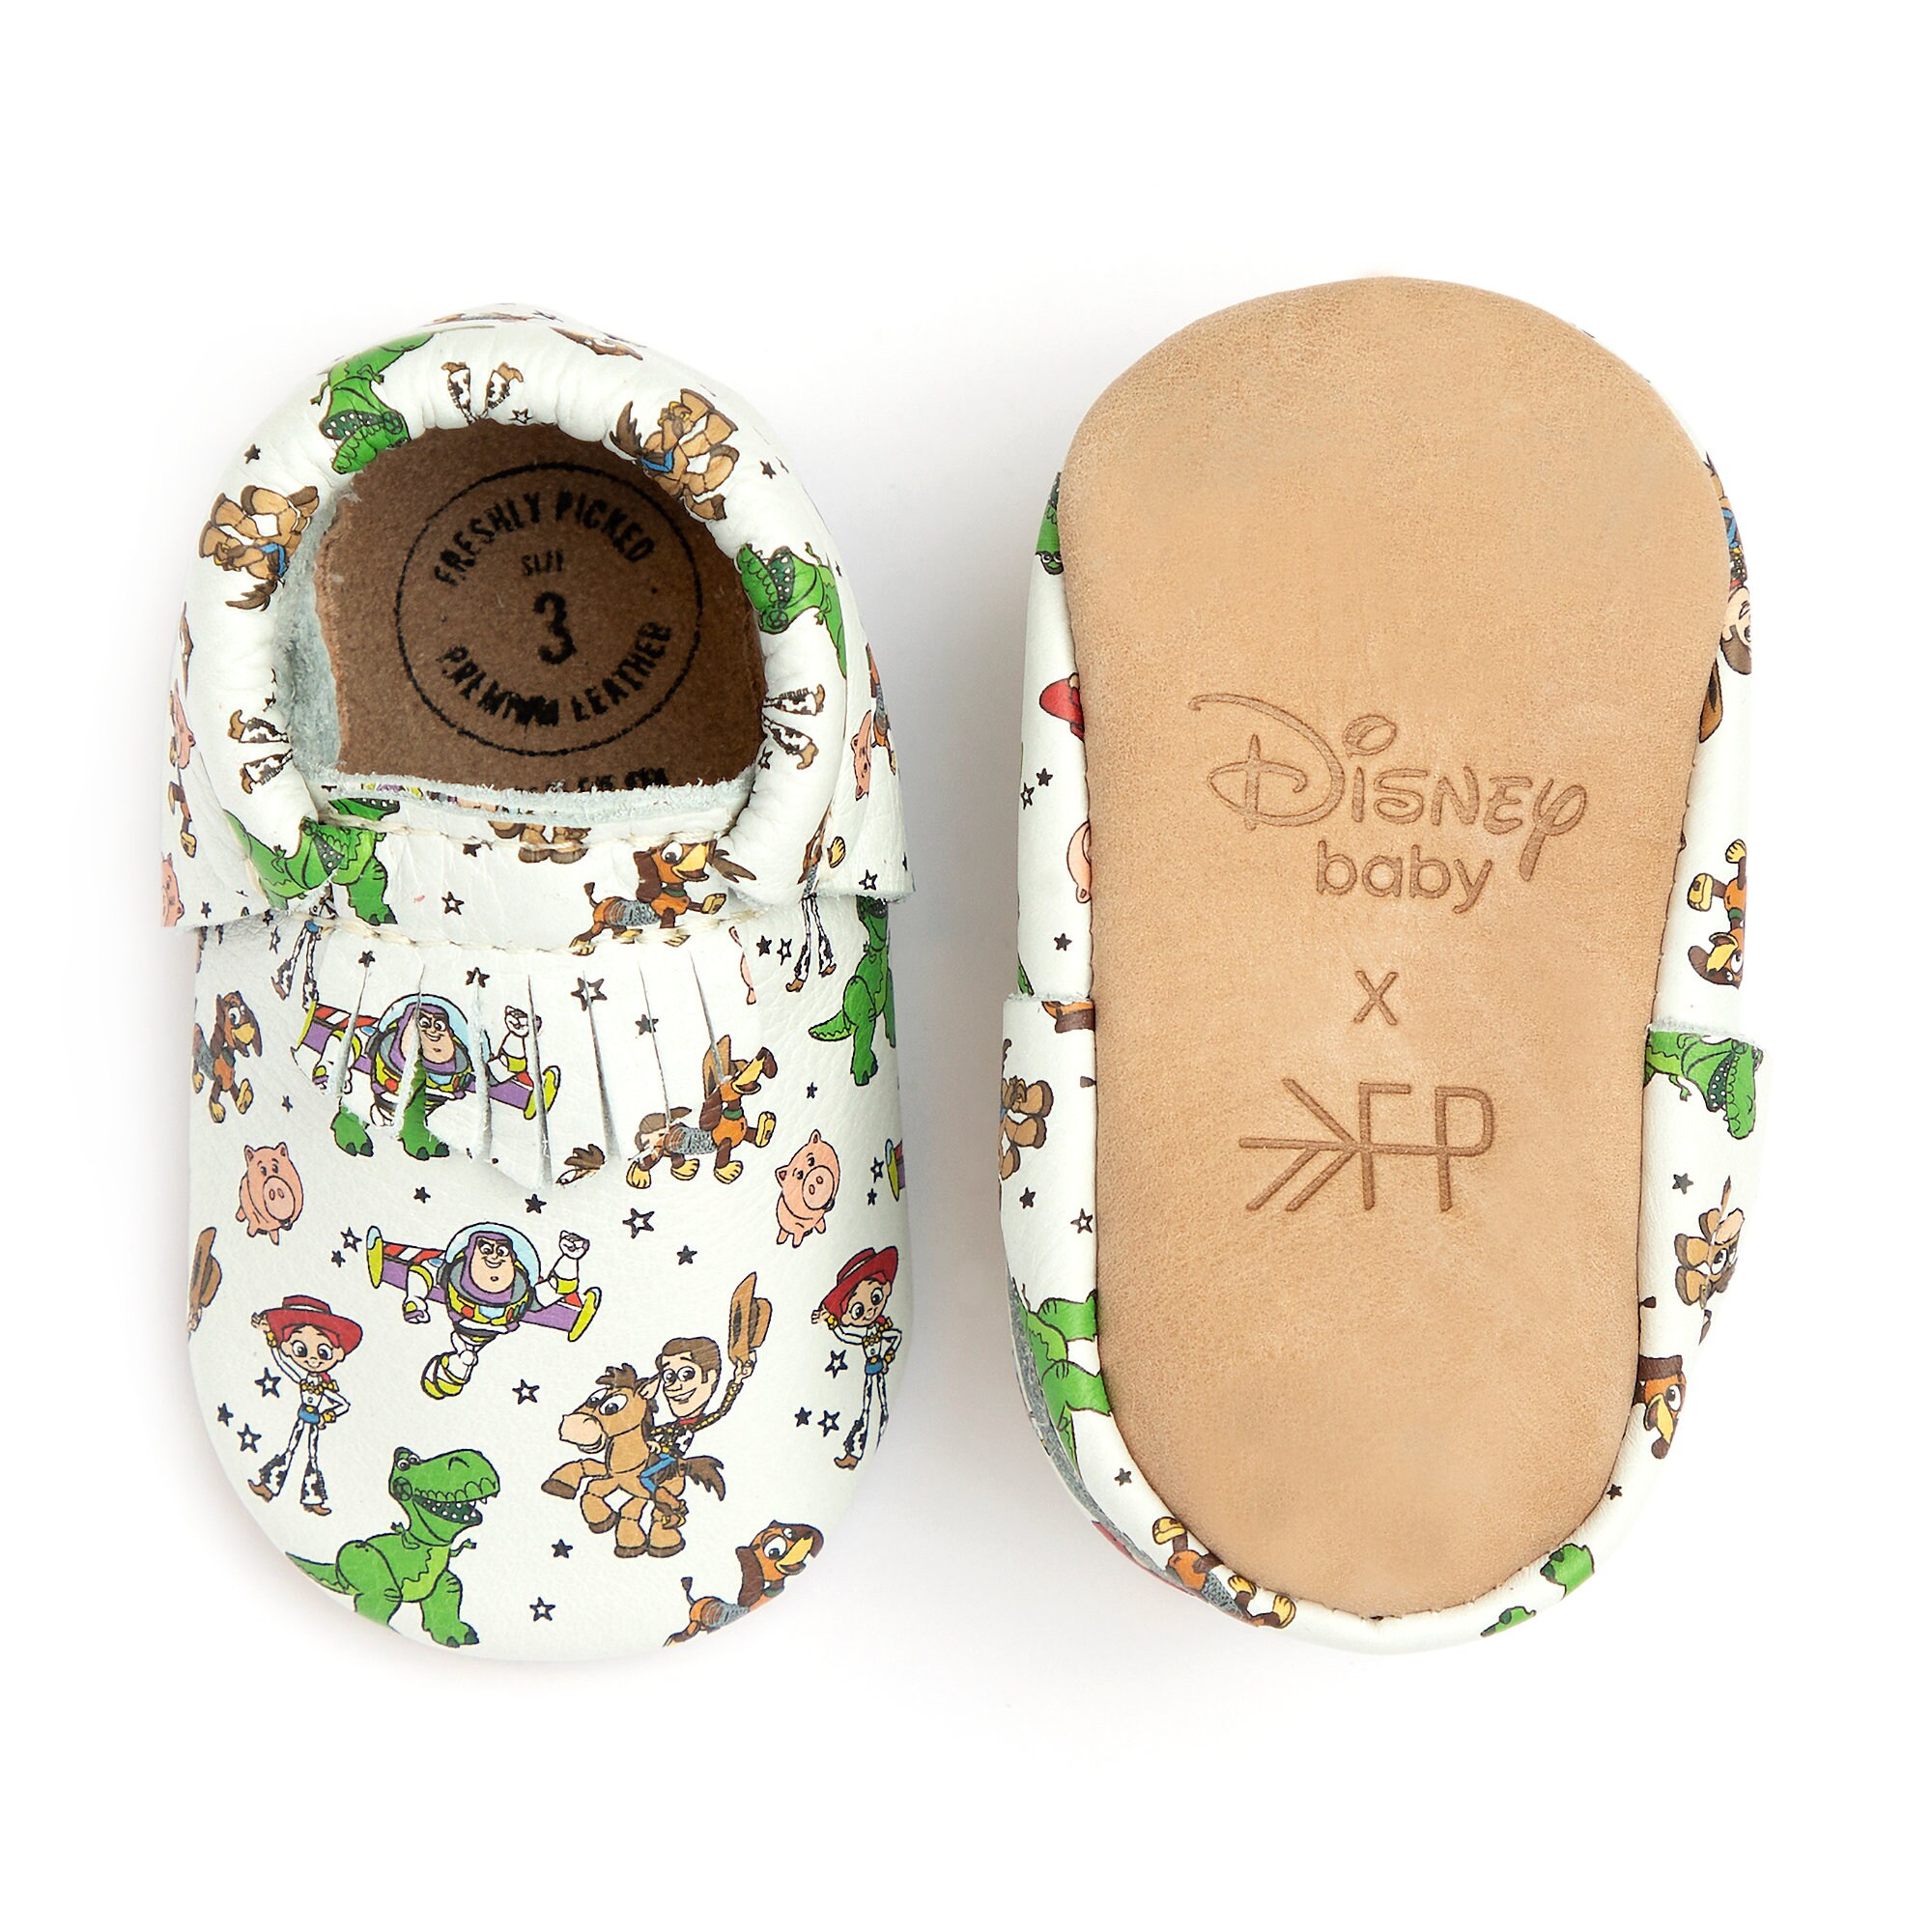 Toy Story Moccasins for Baby by Freshly Picked